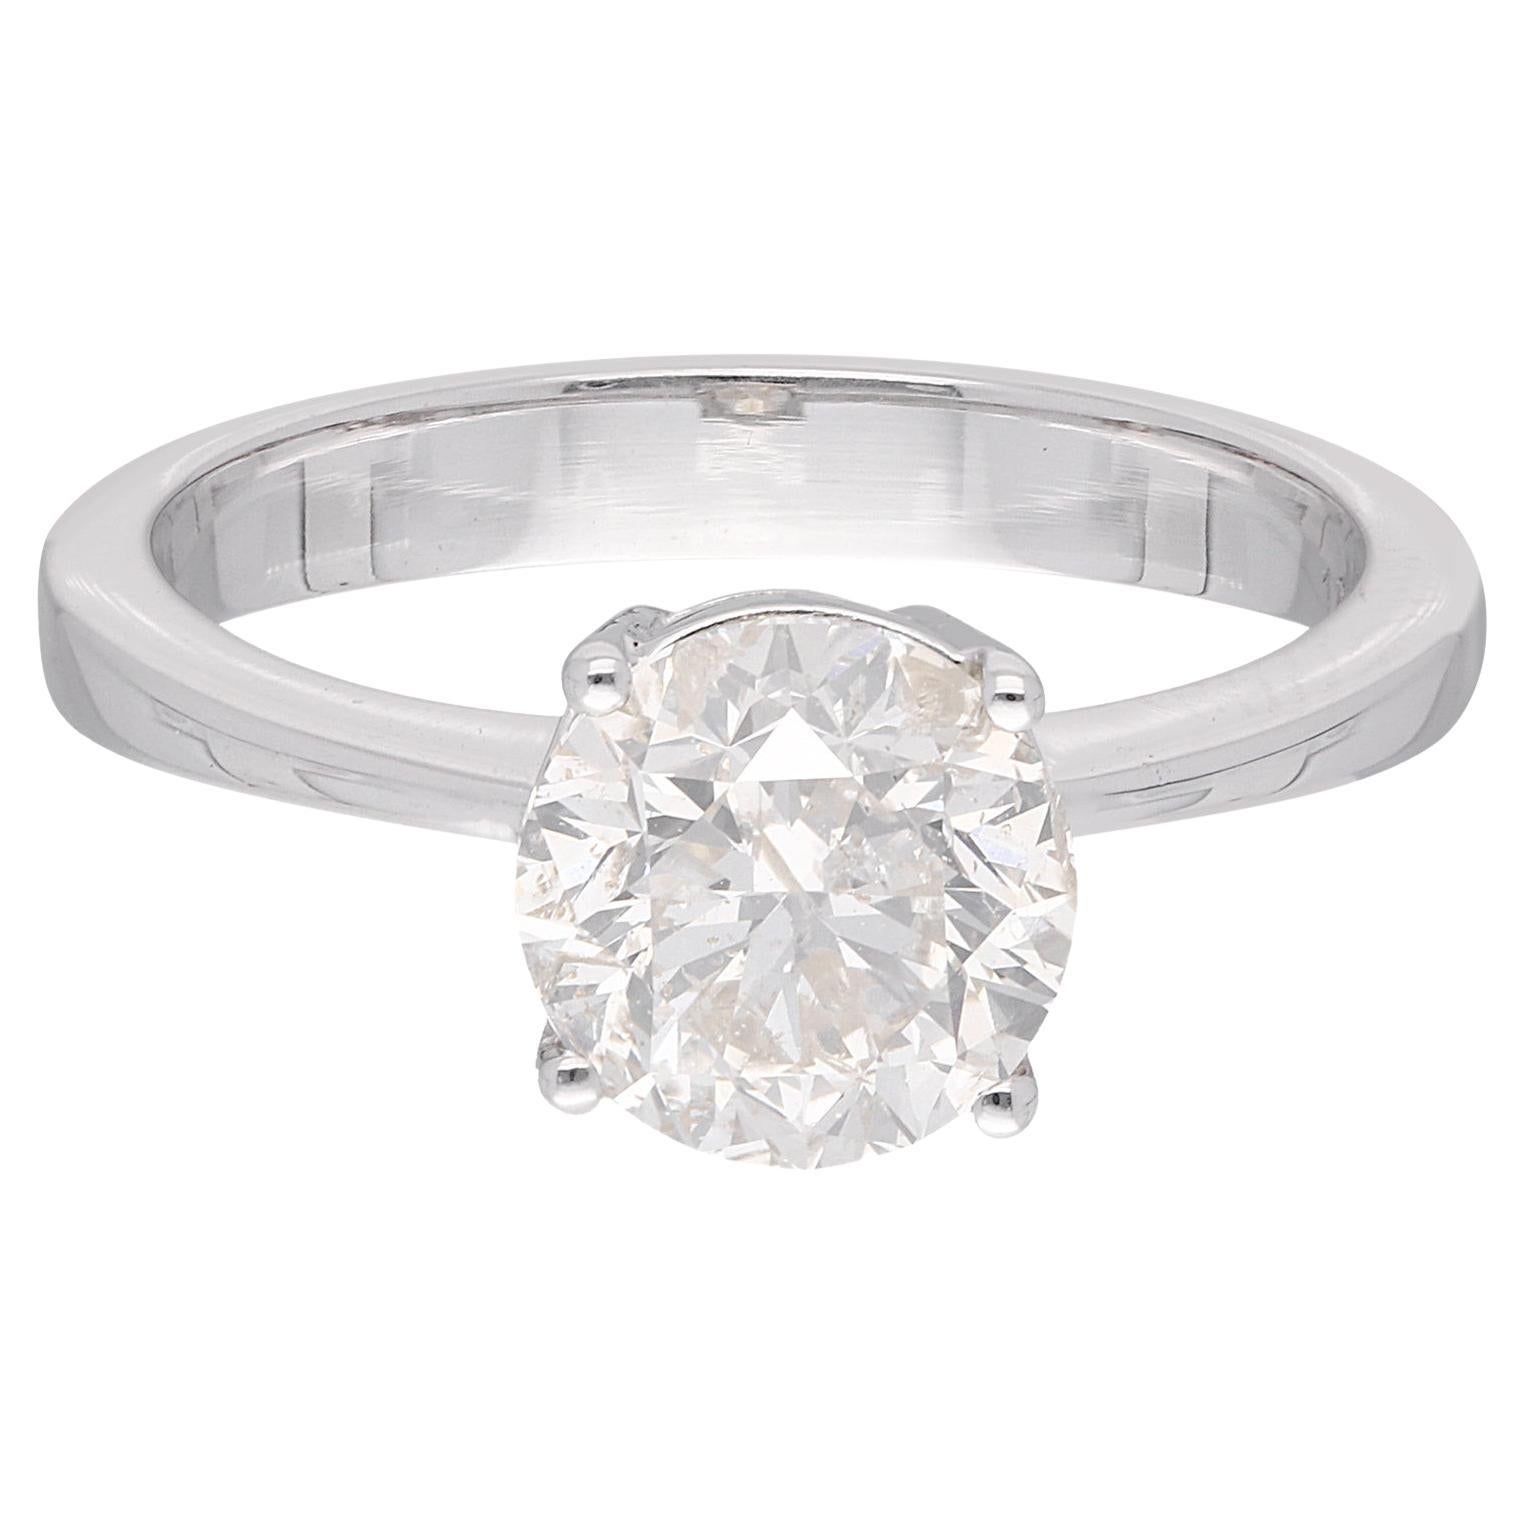 For Sale:  2 Carat SI Clarity HI Color Solitaire Diamond Ring 18 Karat White Gold Jewelry